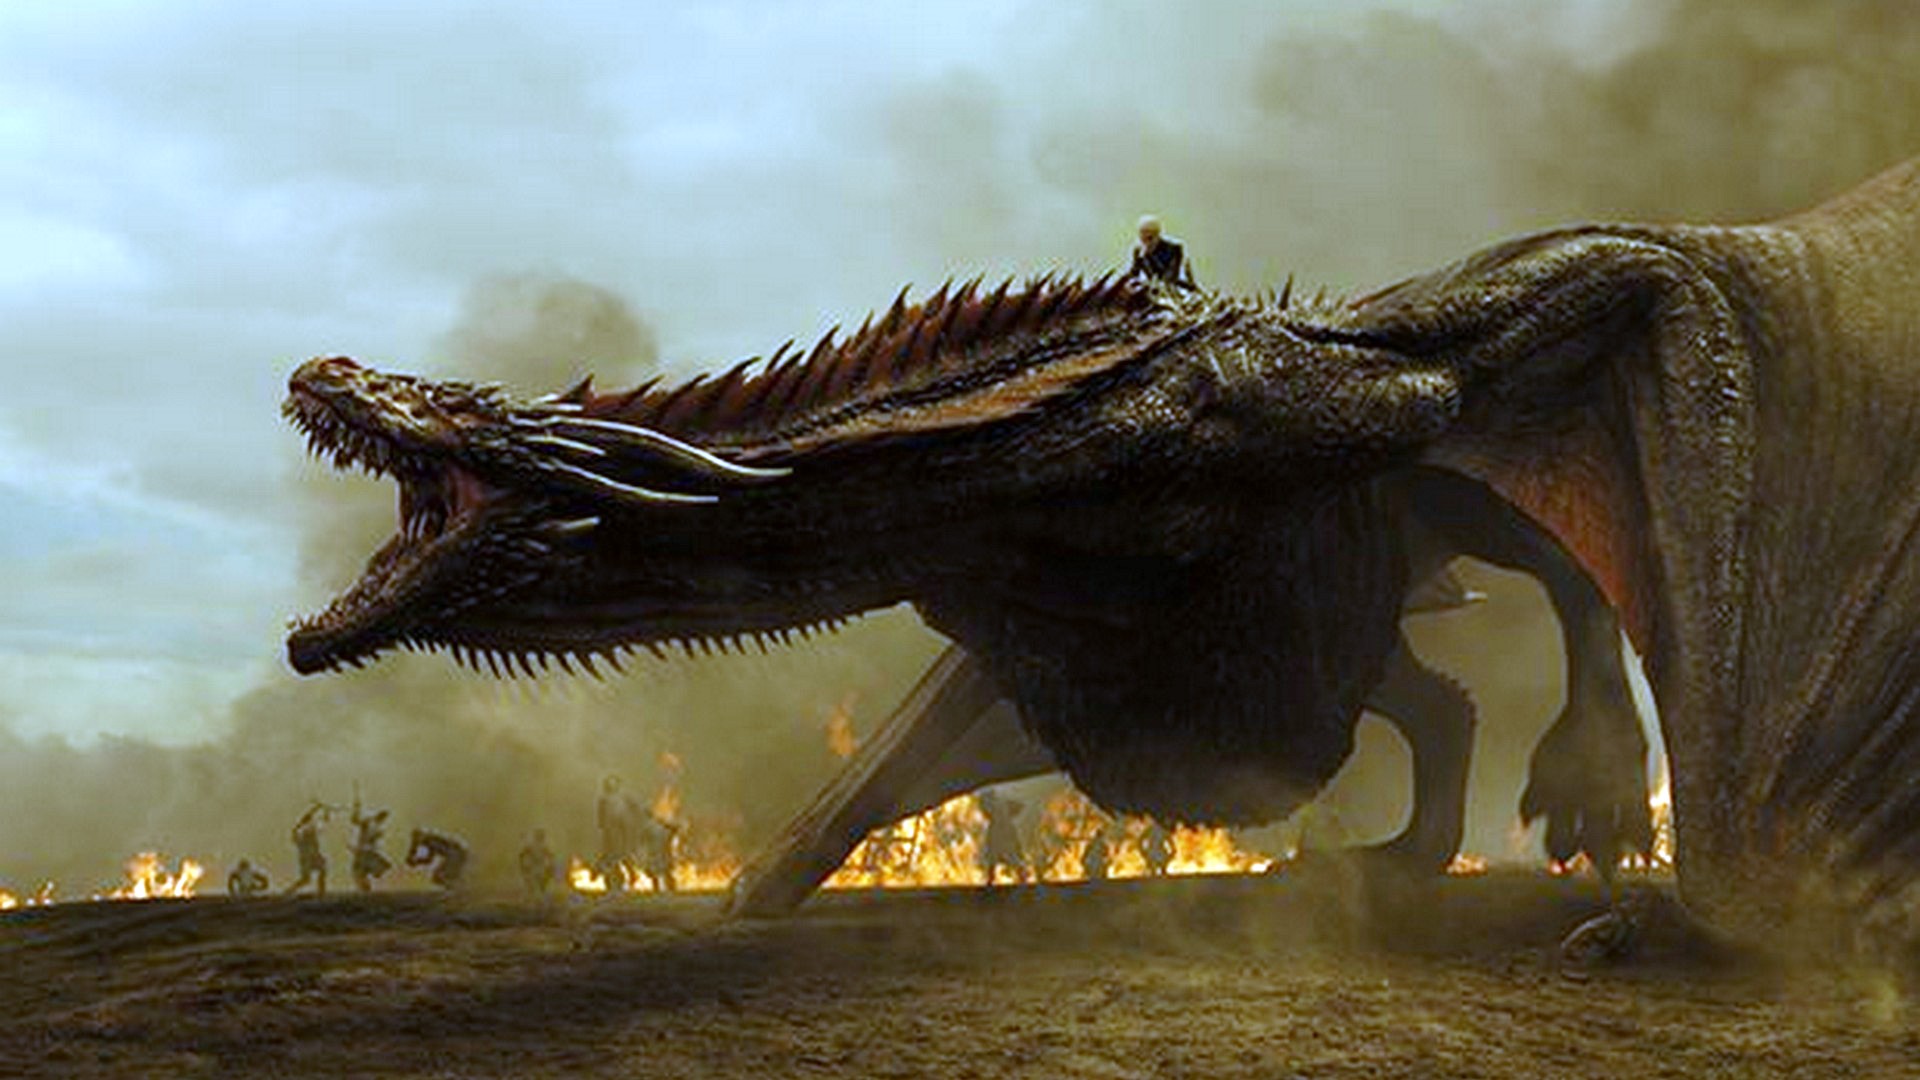 Game of Thrones Dragons Movie Wallpaper with high-resolution 1920x1080 pixel. You can use this poster wallpaper for your Desktop Computers, Mac Screensavers, Windows Backgrounds, iPhone Wallpapers, Tablet or Android Lock screen and another Mobile device